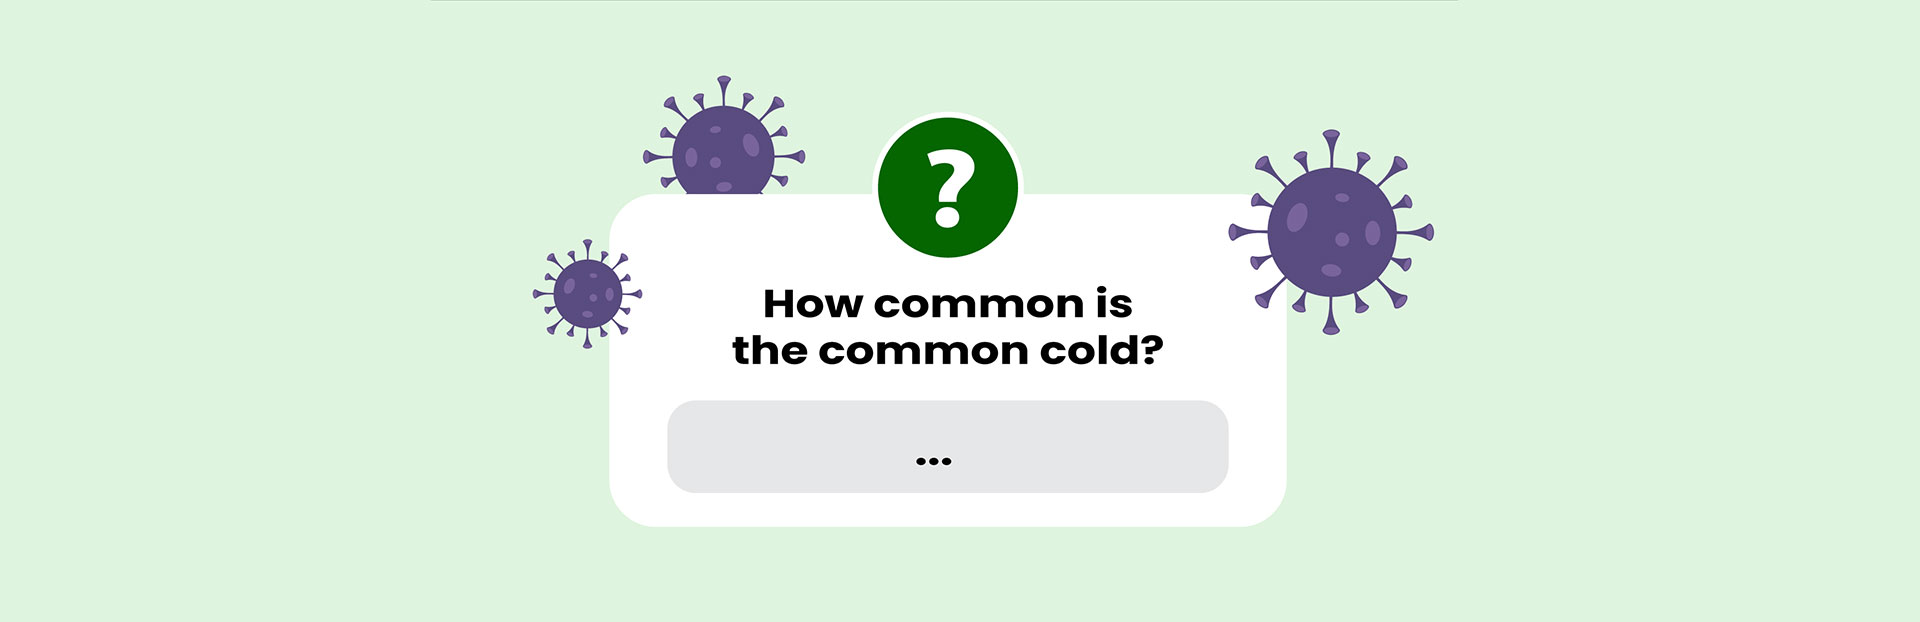 basics on how to prevent and treat the common cold at home